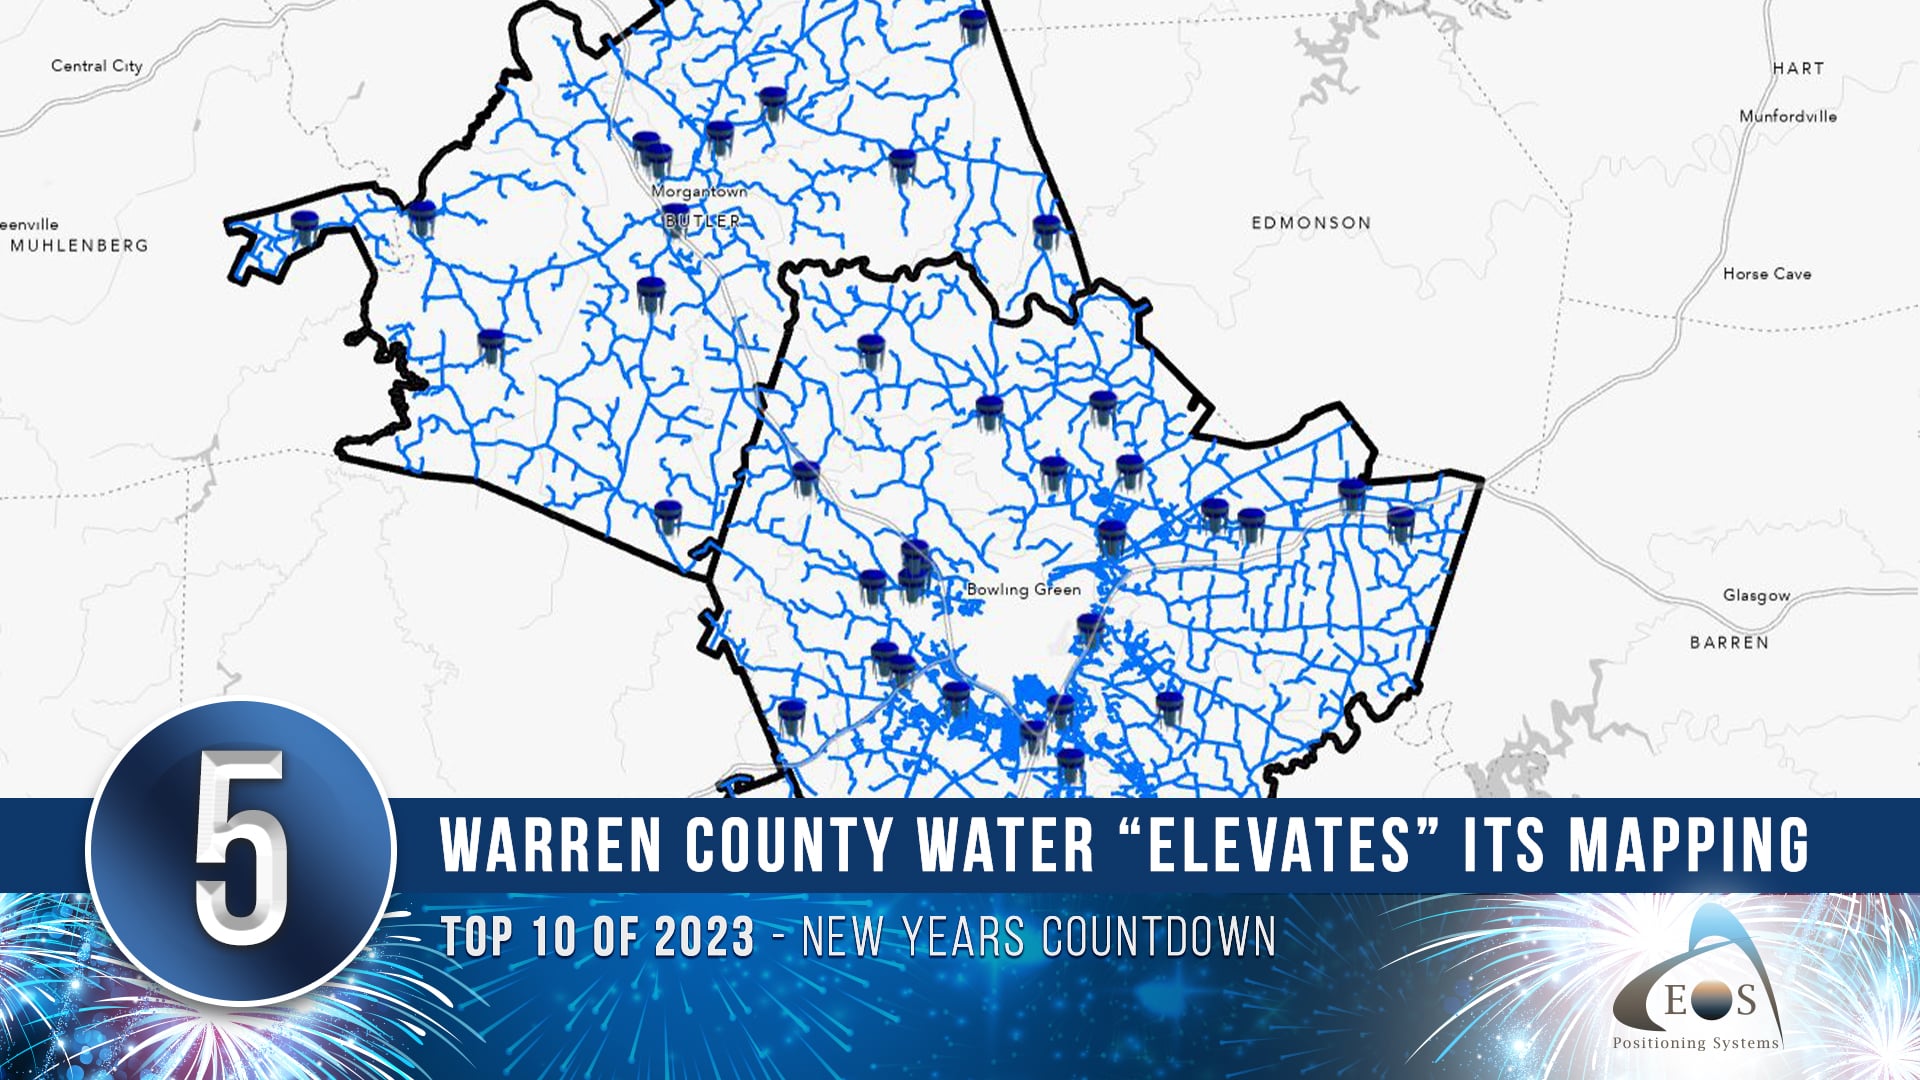 5 - Warren County Water District Elevates Its Mapping Top 10 of 2023